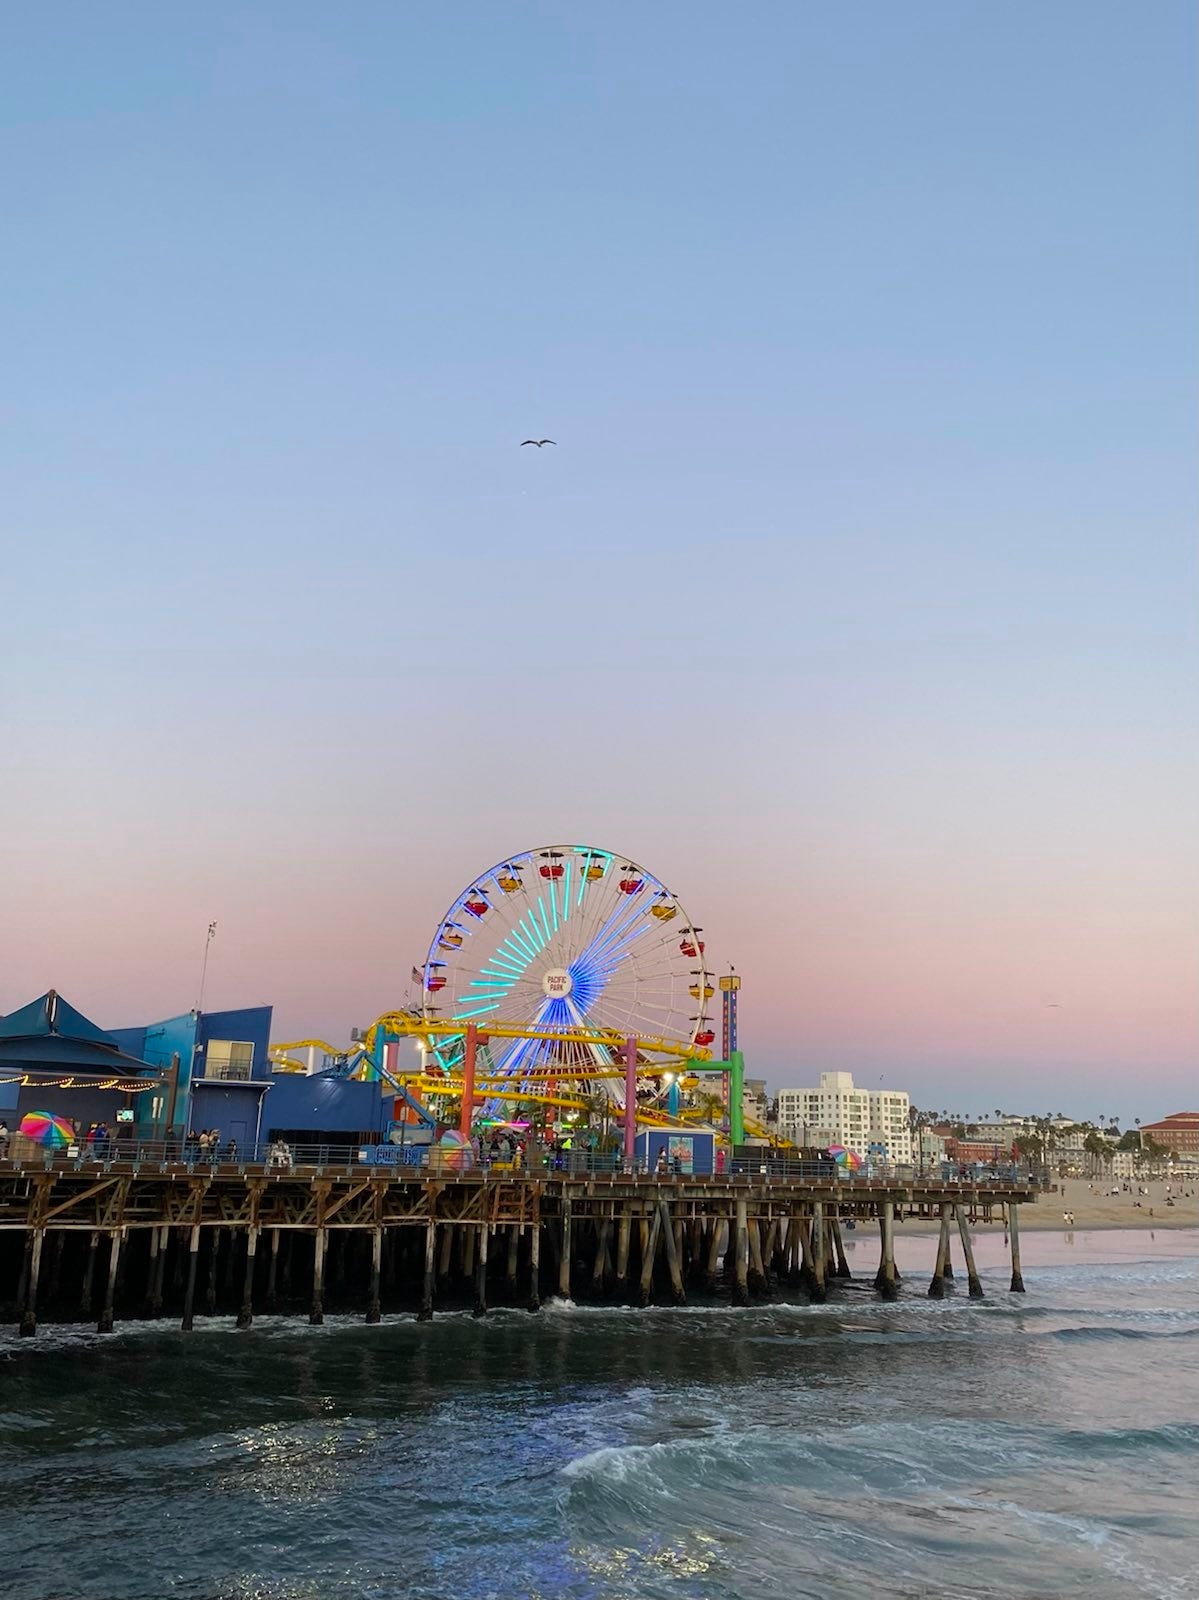 A photo of the Santa Monica boardwalk with a sunset sky in the back.